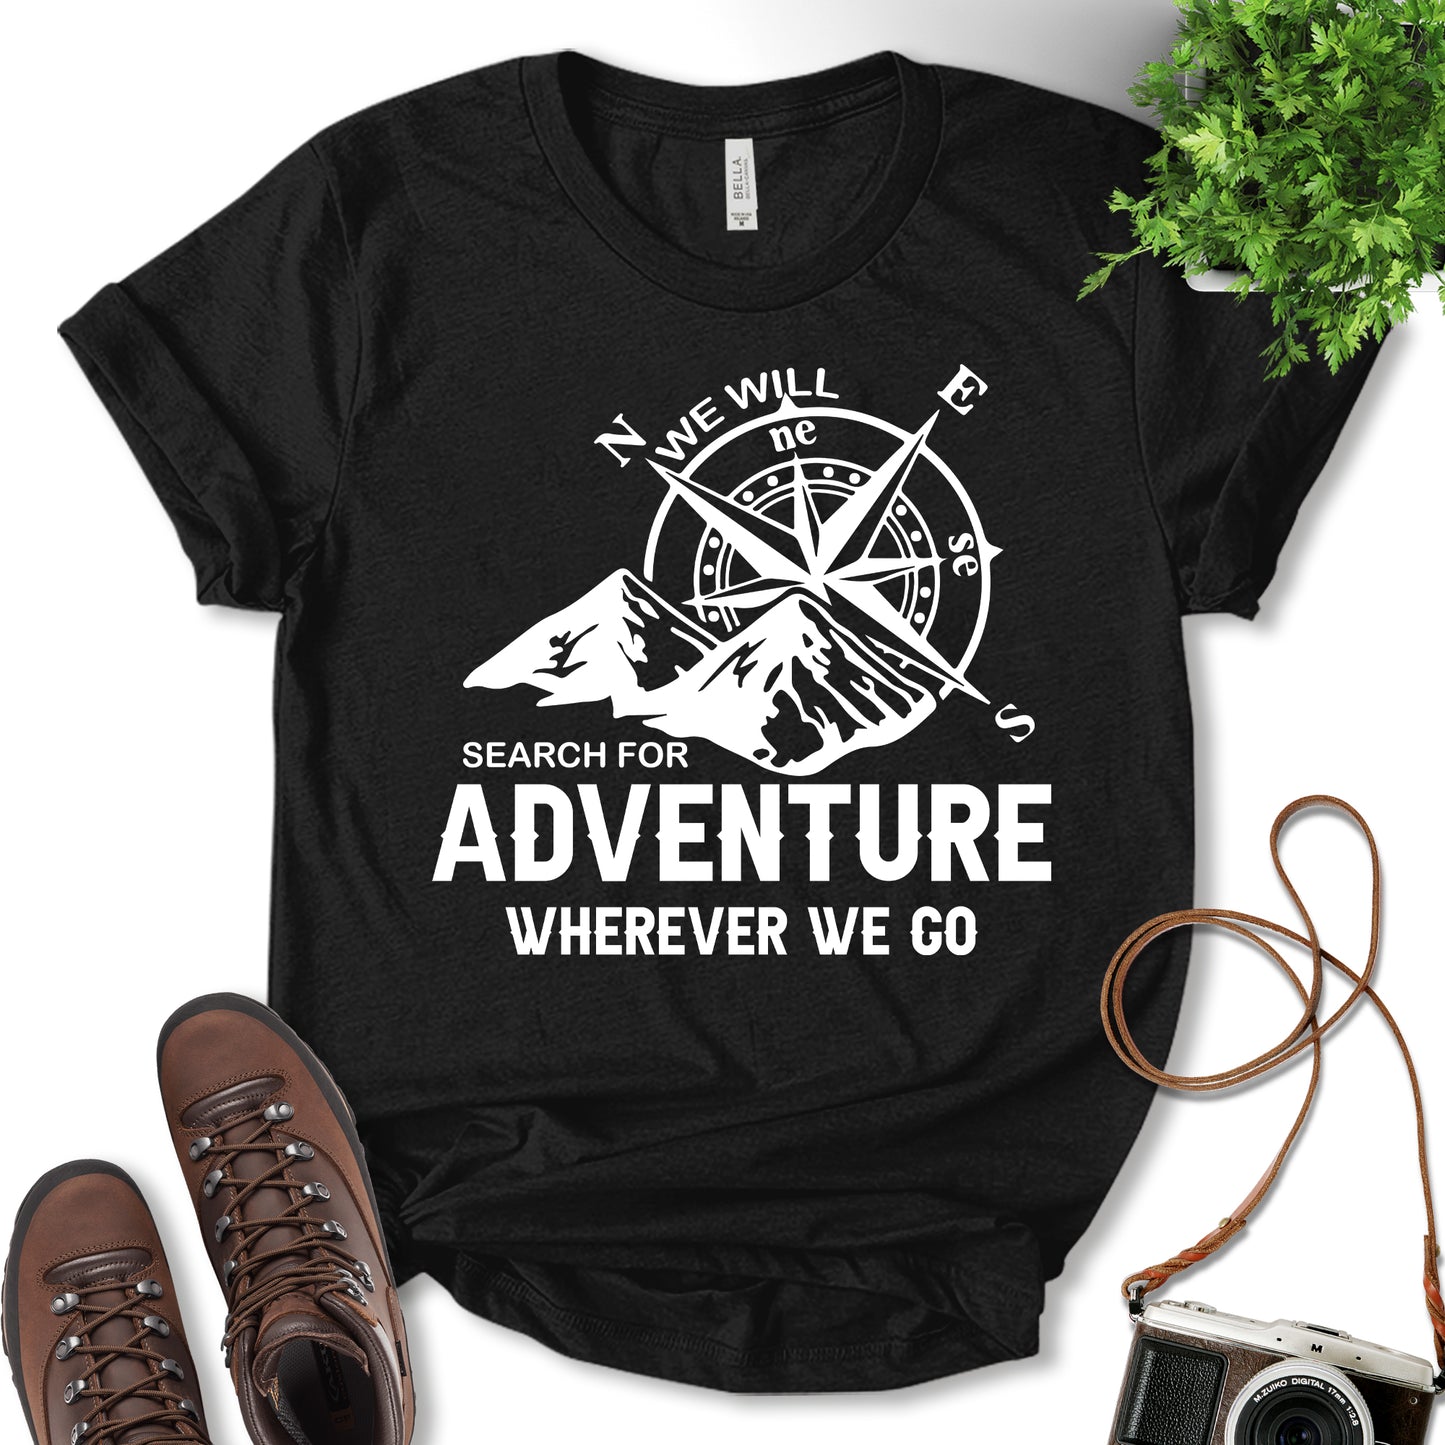 We Will Search For Adventure Wherever We Go Shirt, Outdoor Lover Shirt, Adventure Shirt, Camping Shirt, Mountain Shirt, Hiking Shirt, Nature Lover, Adventure Gift, Unisex T-shirt